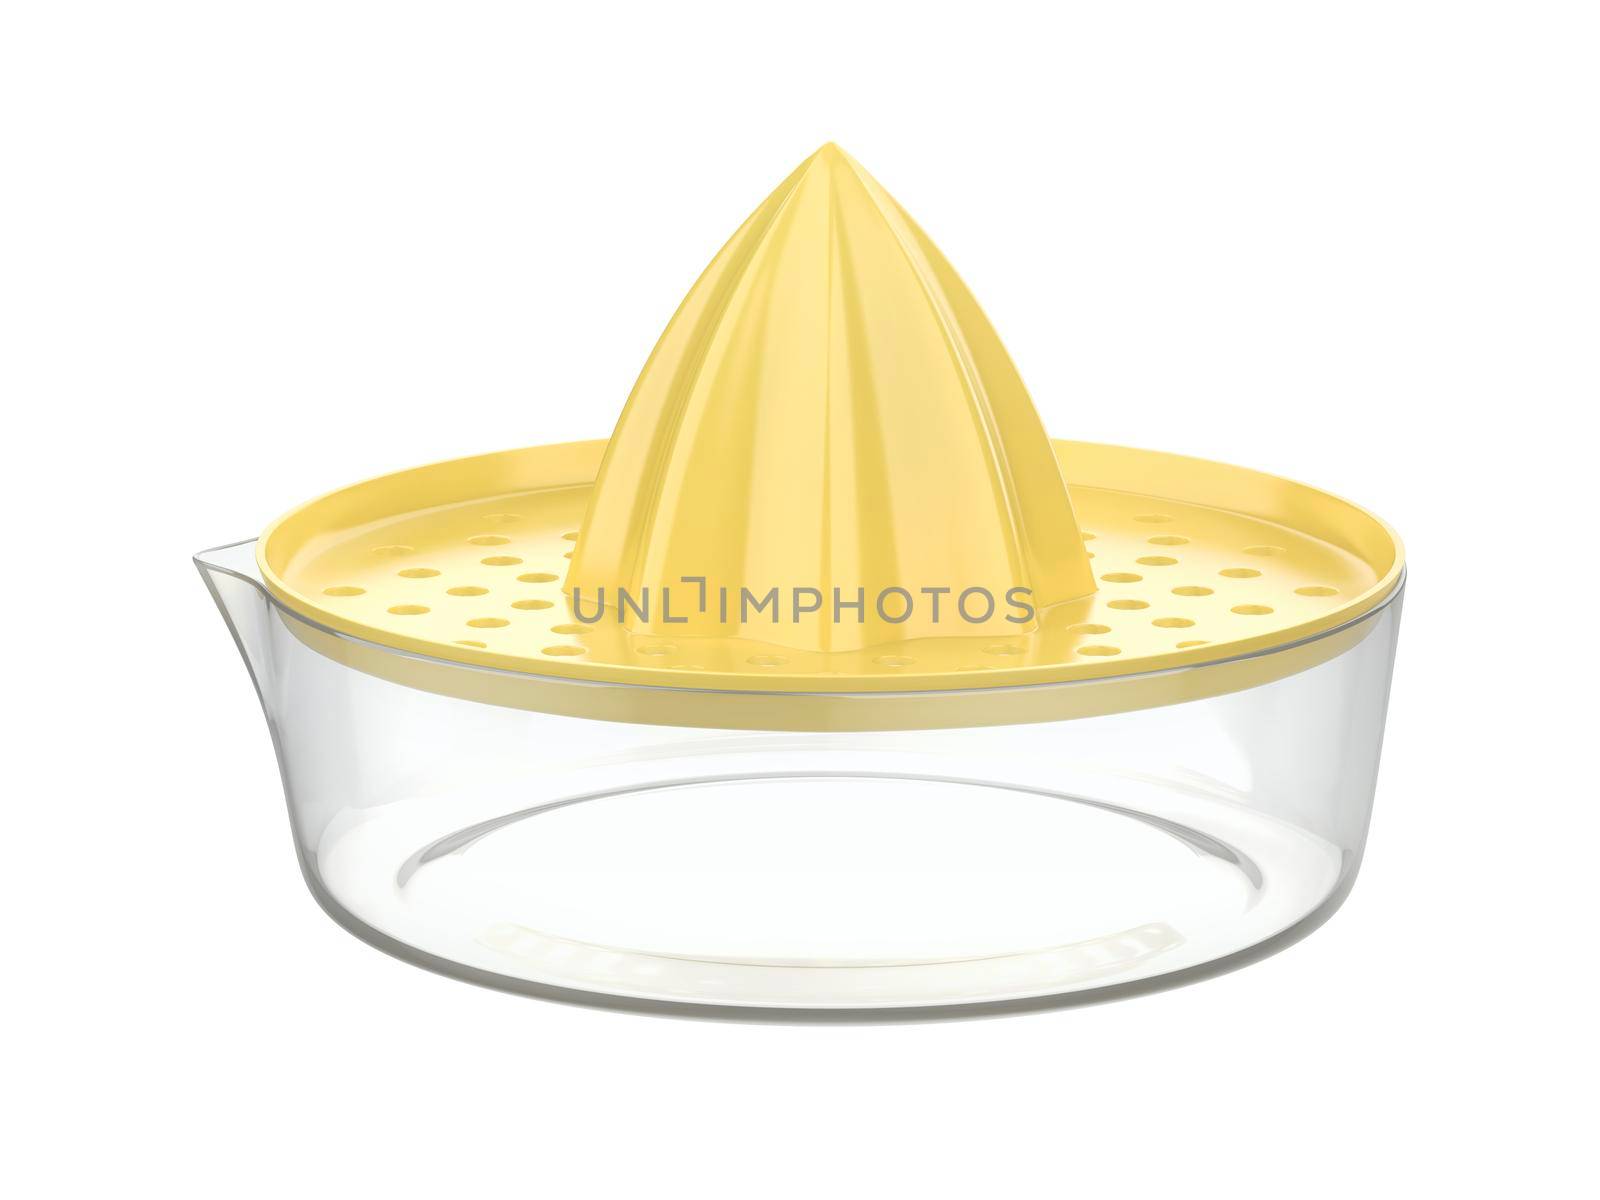 Yellow citrus juicer by magraphics